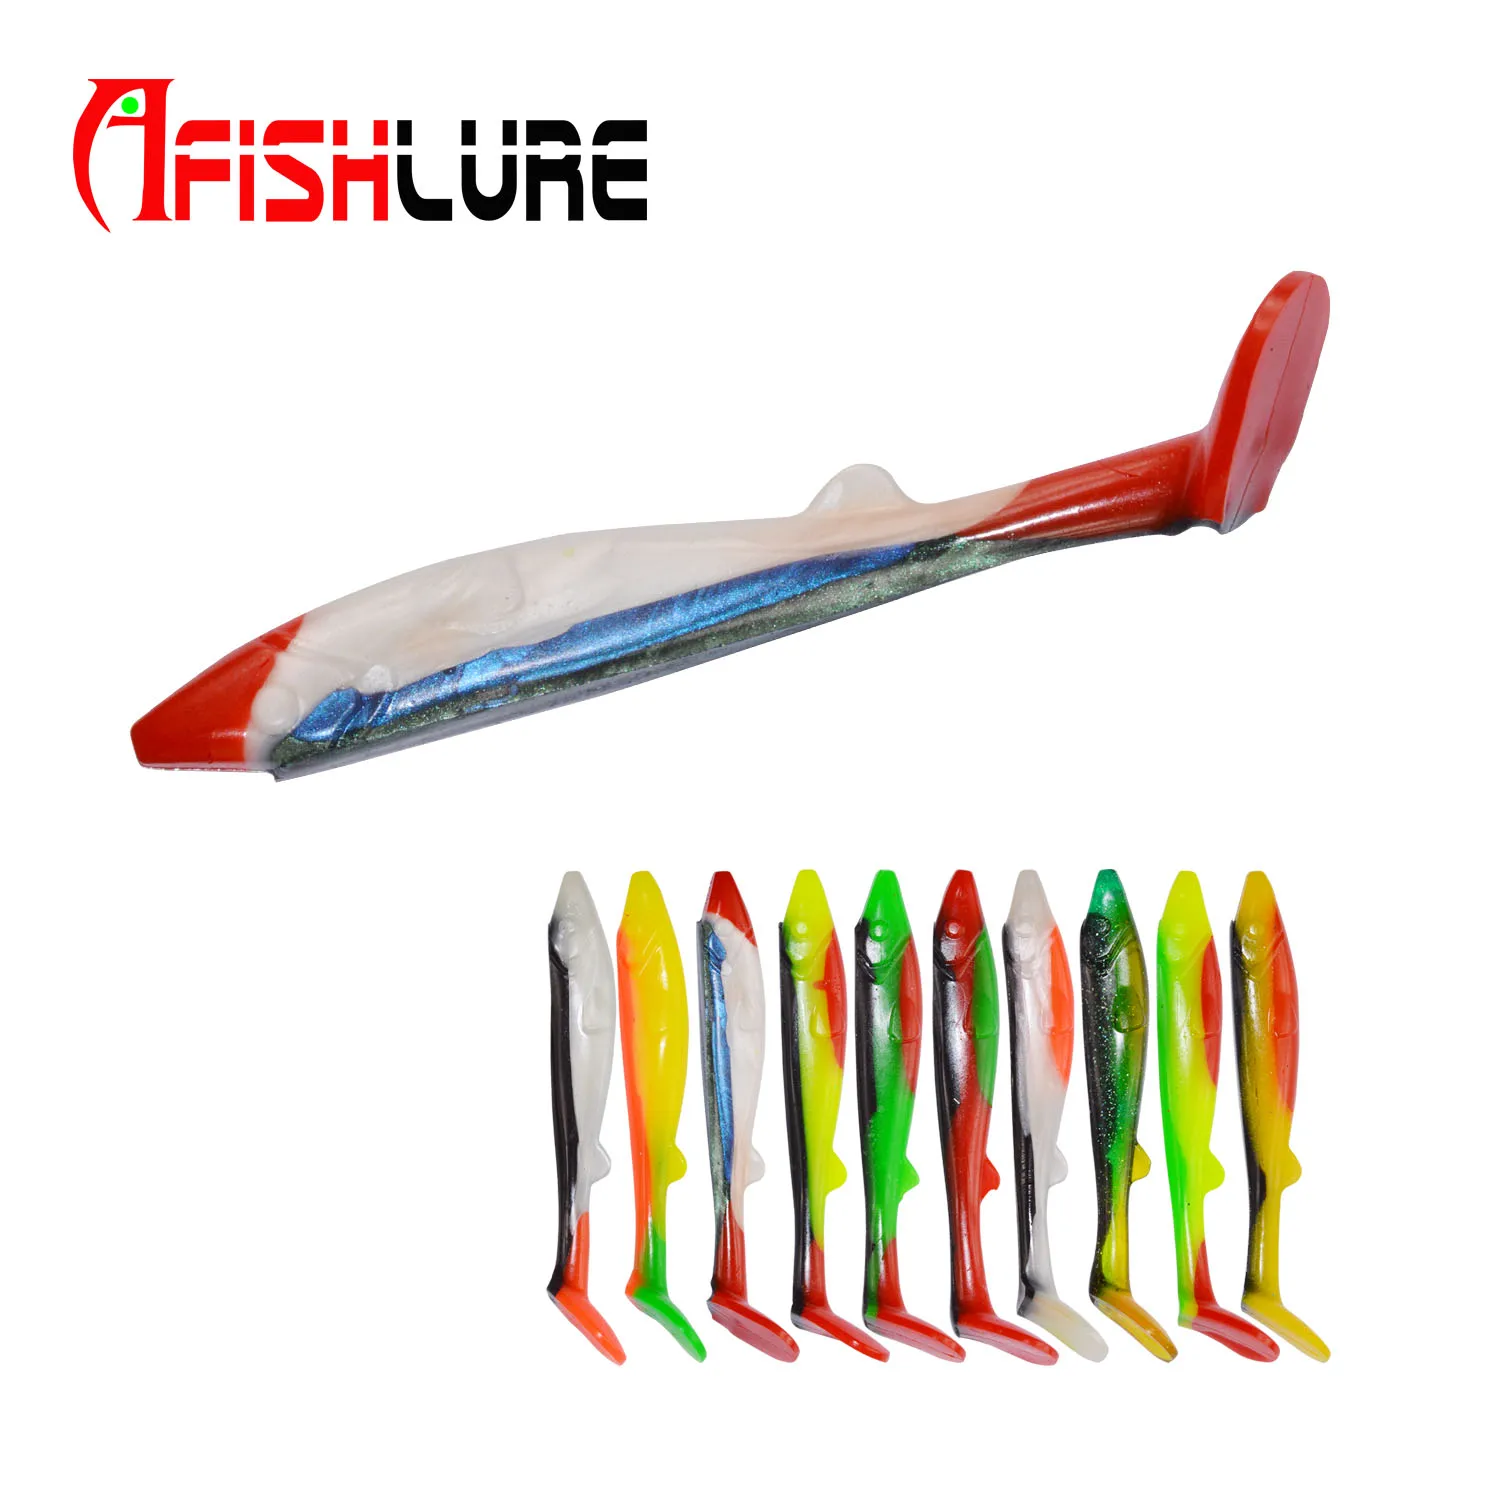 

Handmade Soft Bait 90mm 8.4g Fishing Lure Shad baits Plastic Lure Pasca Shad Manual Silicone Bass fish, 10 colors for choice